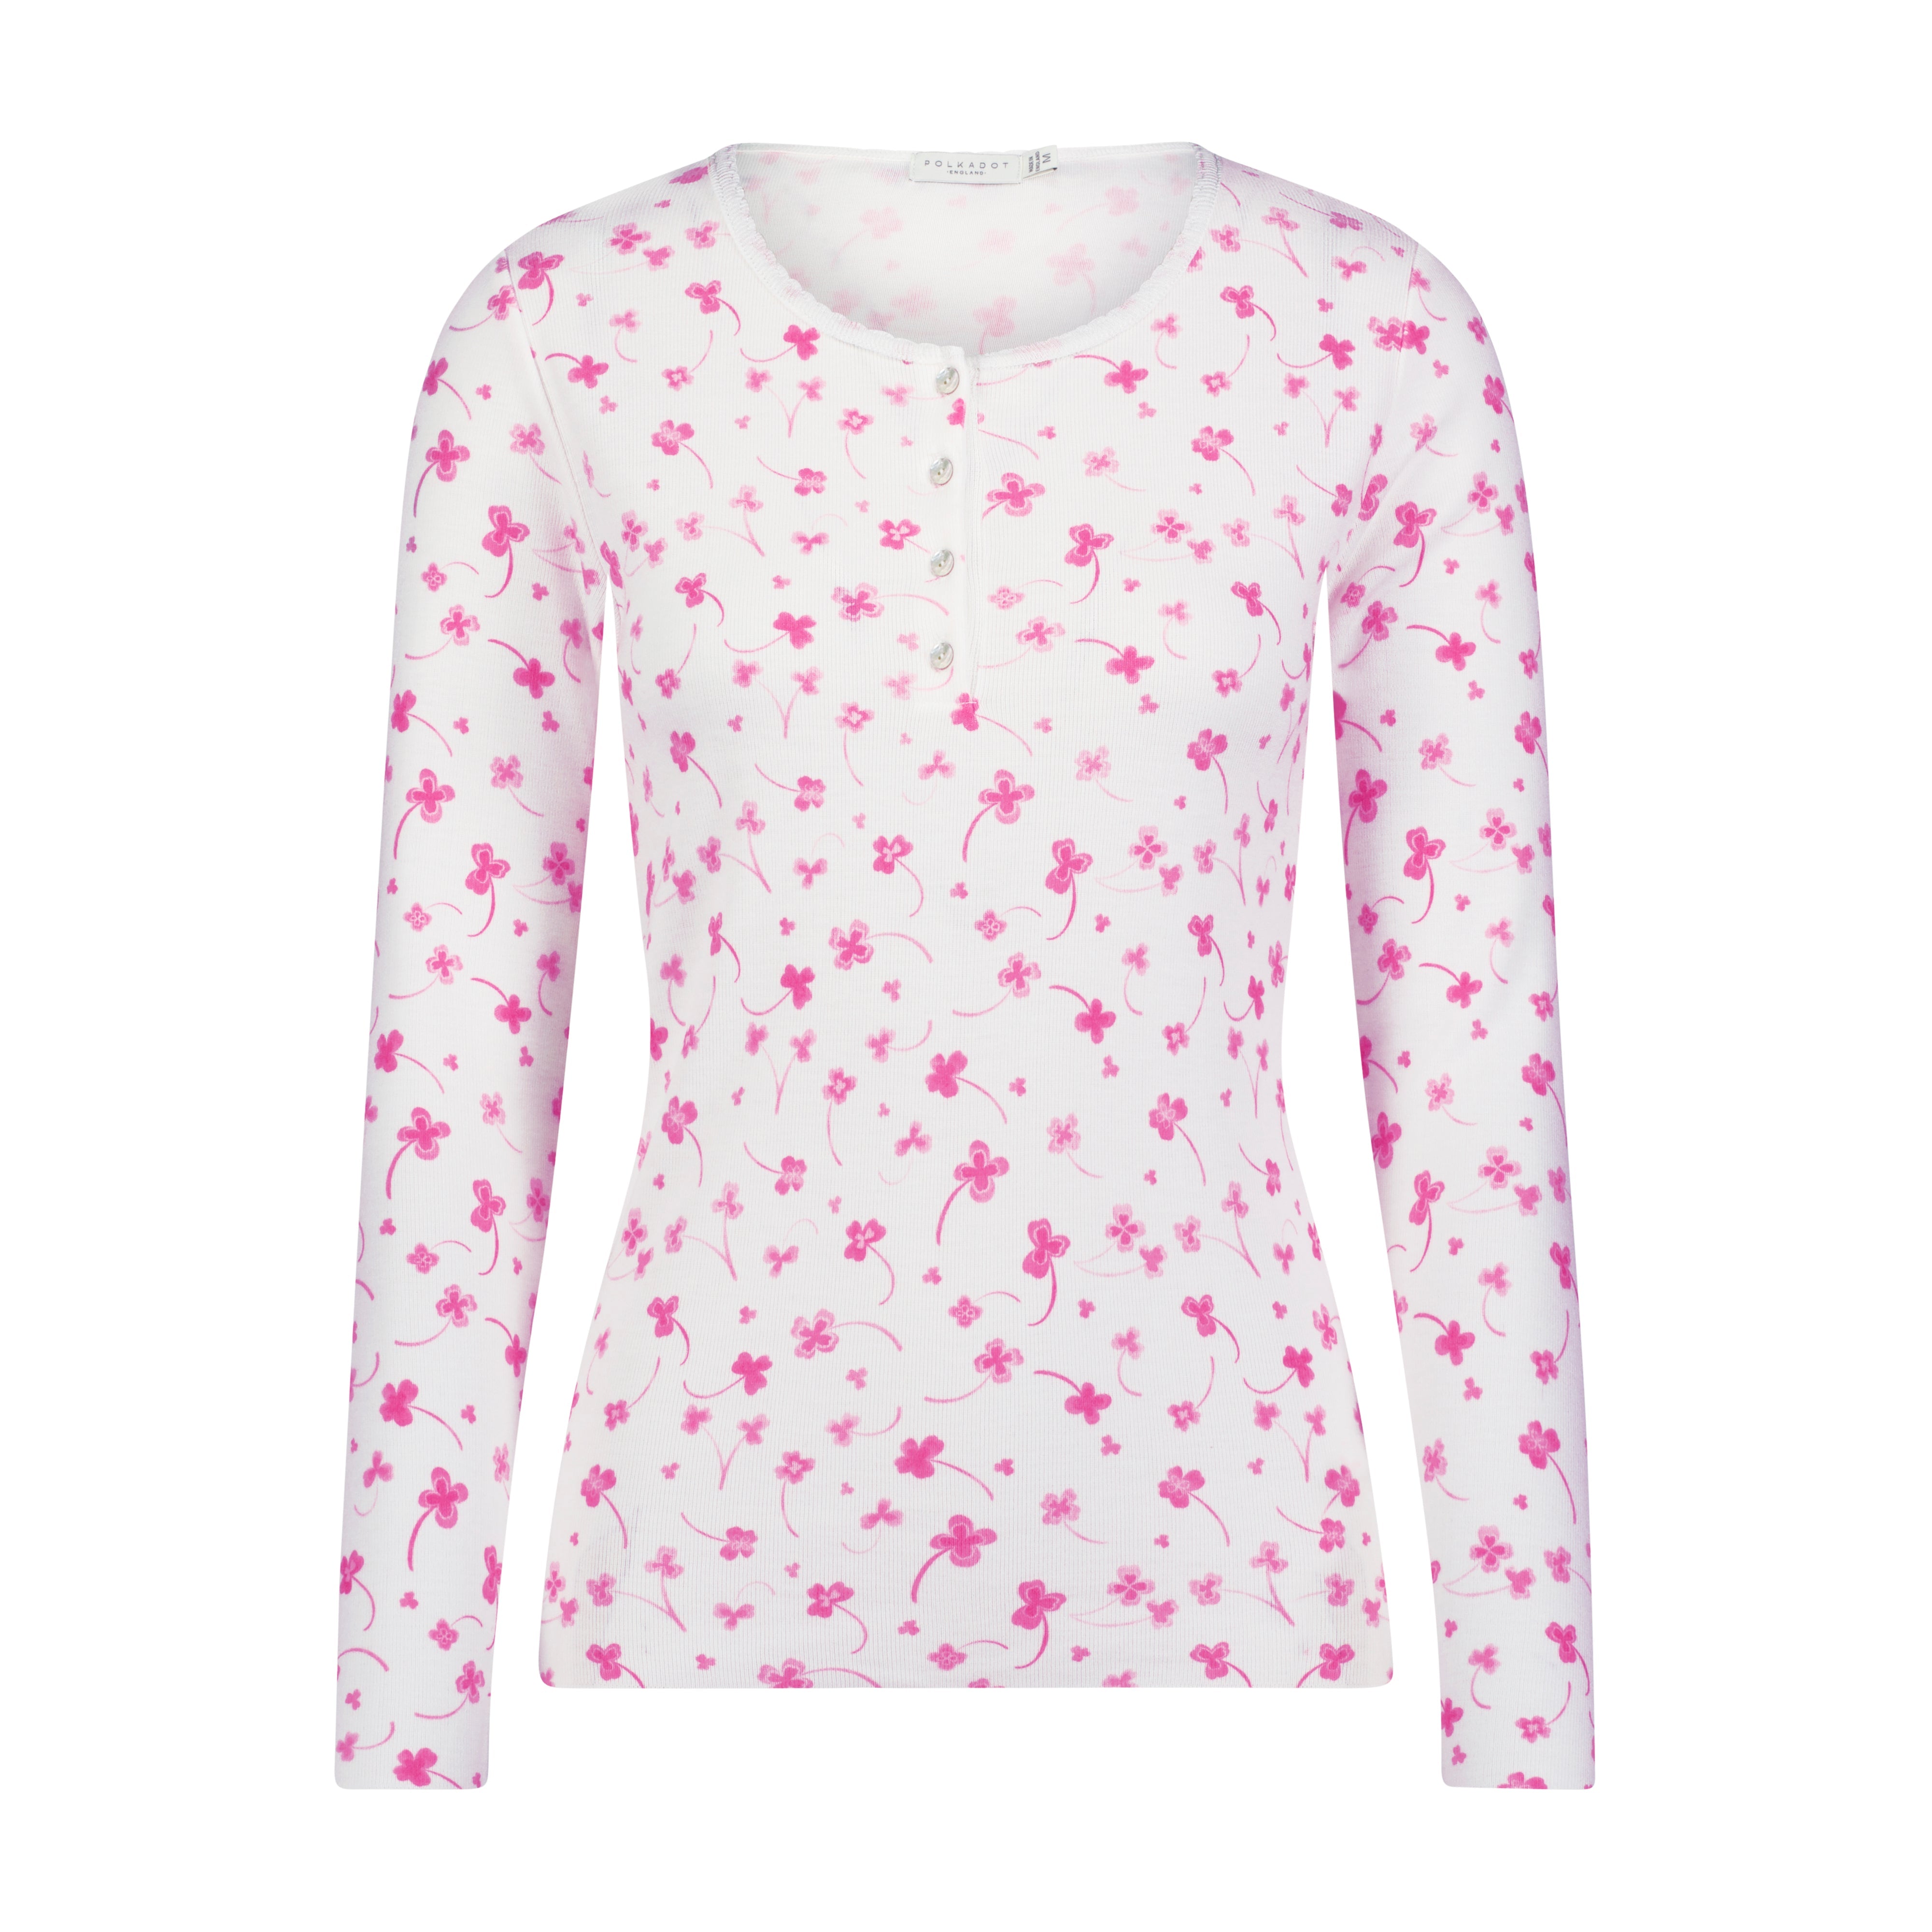 PINK CLOVER Print HENLEY Fitted LS 4 Button